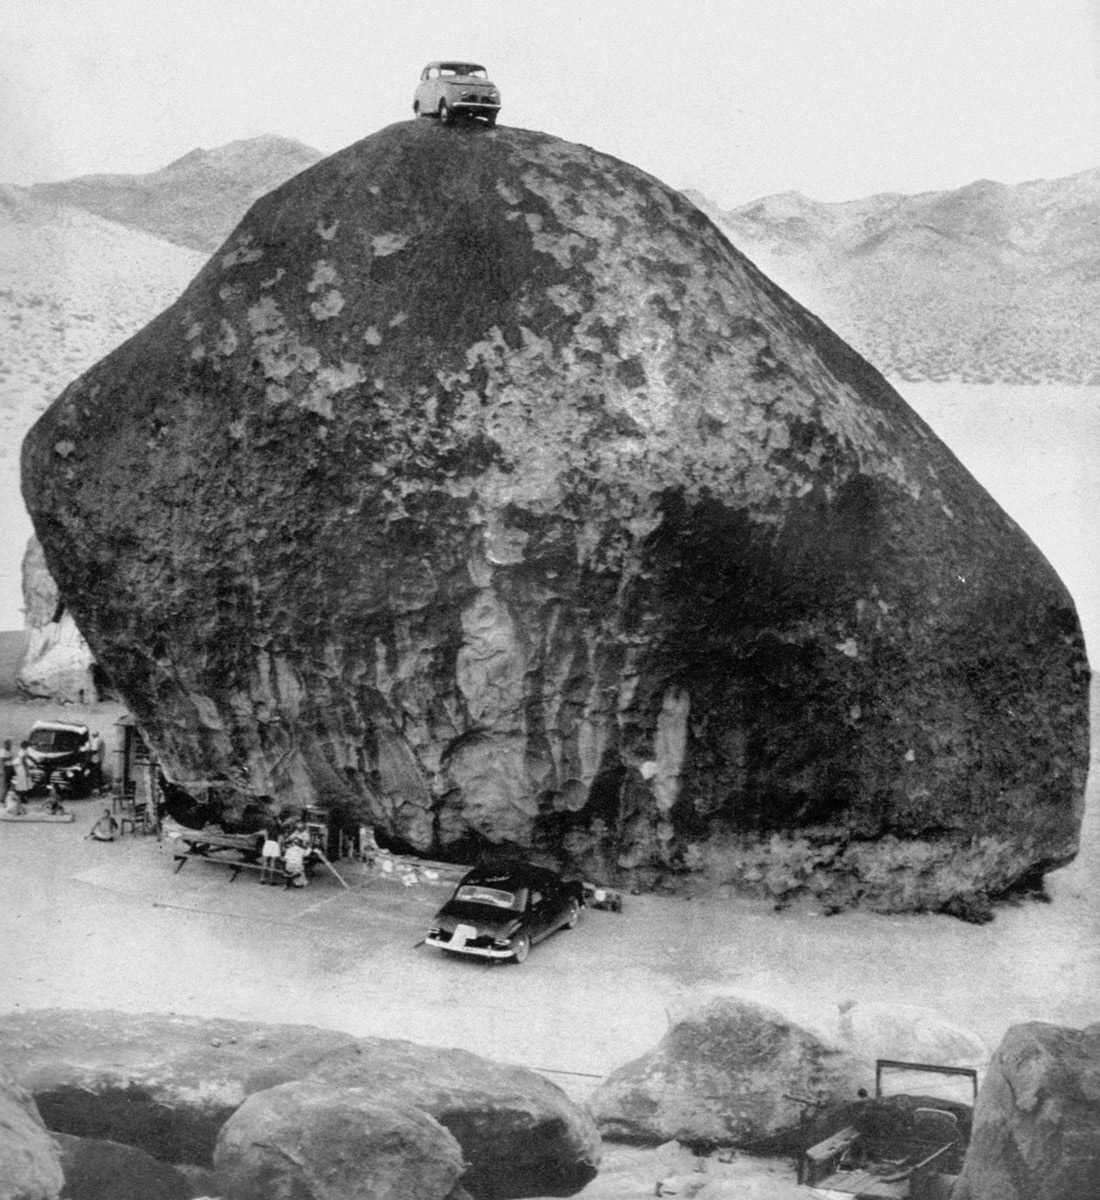 A photograph of Van Tassel’s boulder, crowned with a car hoisted using a windlass and cable, featured as a “Picture of the Week” in the 15th of October nineteen fifty-one issue of “Life.” 